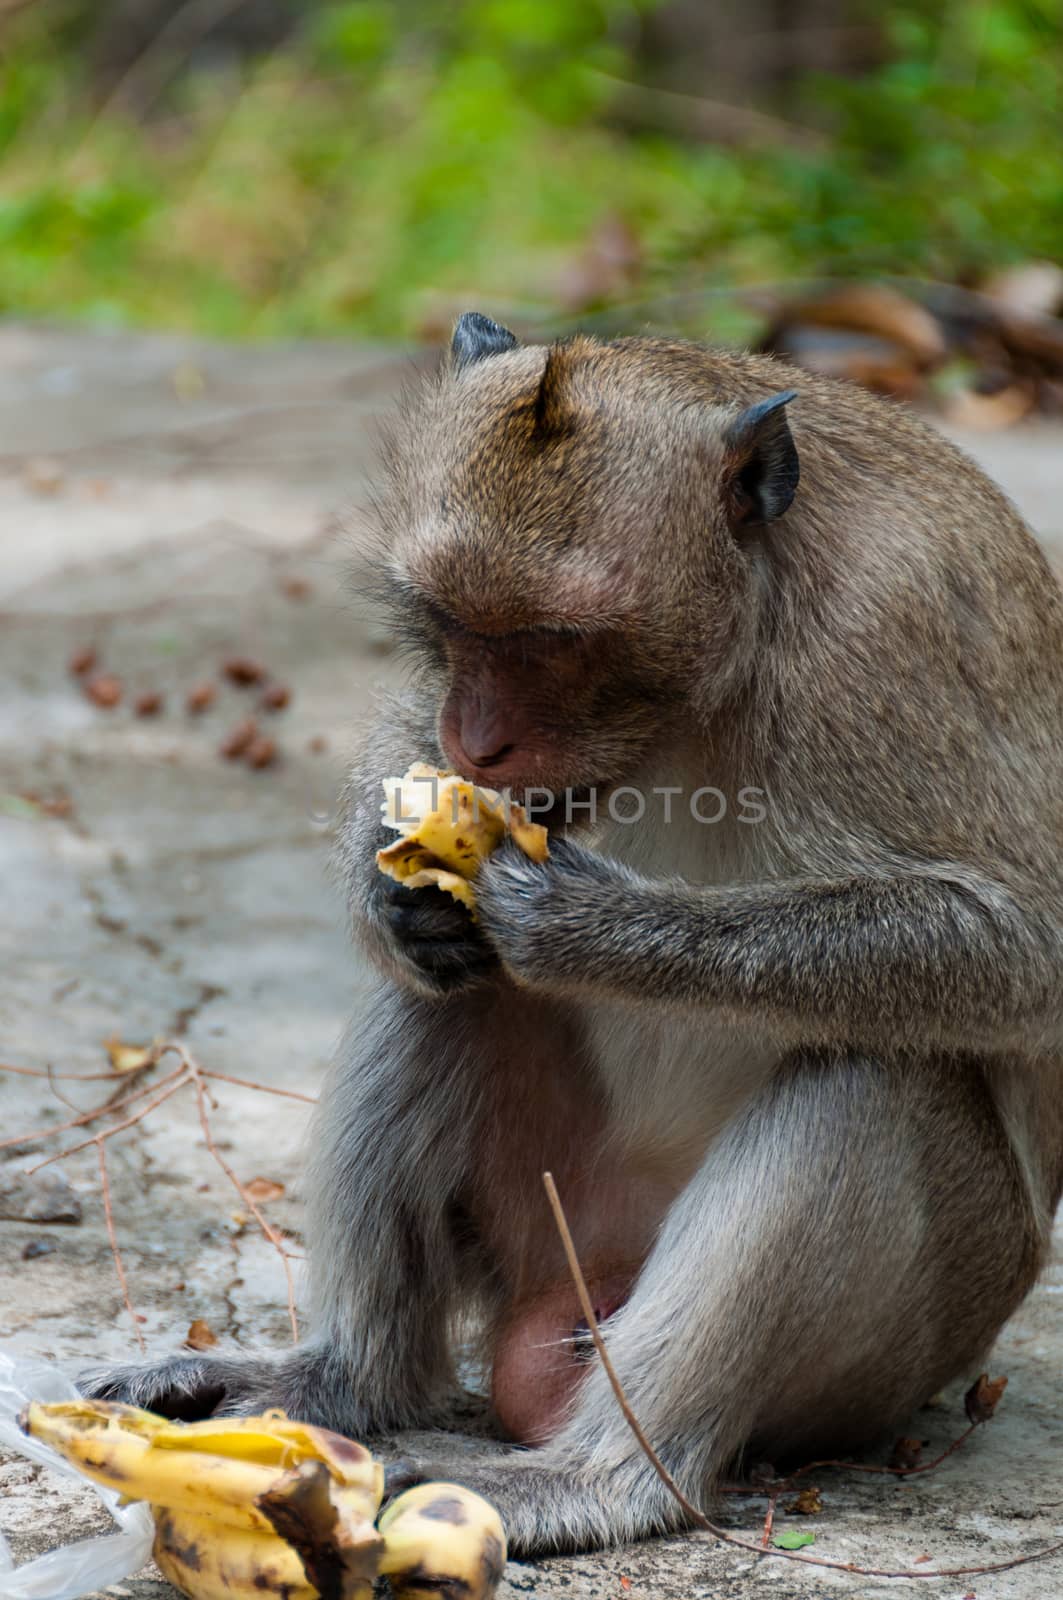 Monkey Rhesus Macaque sitting and eating a banana by attiarndt